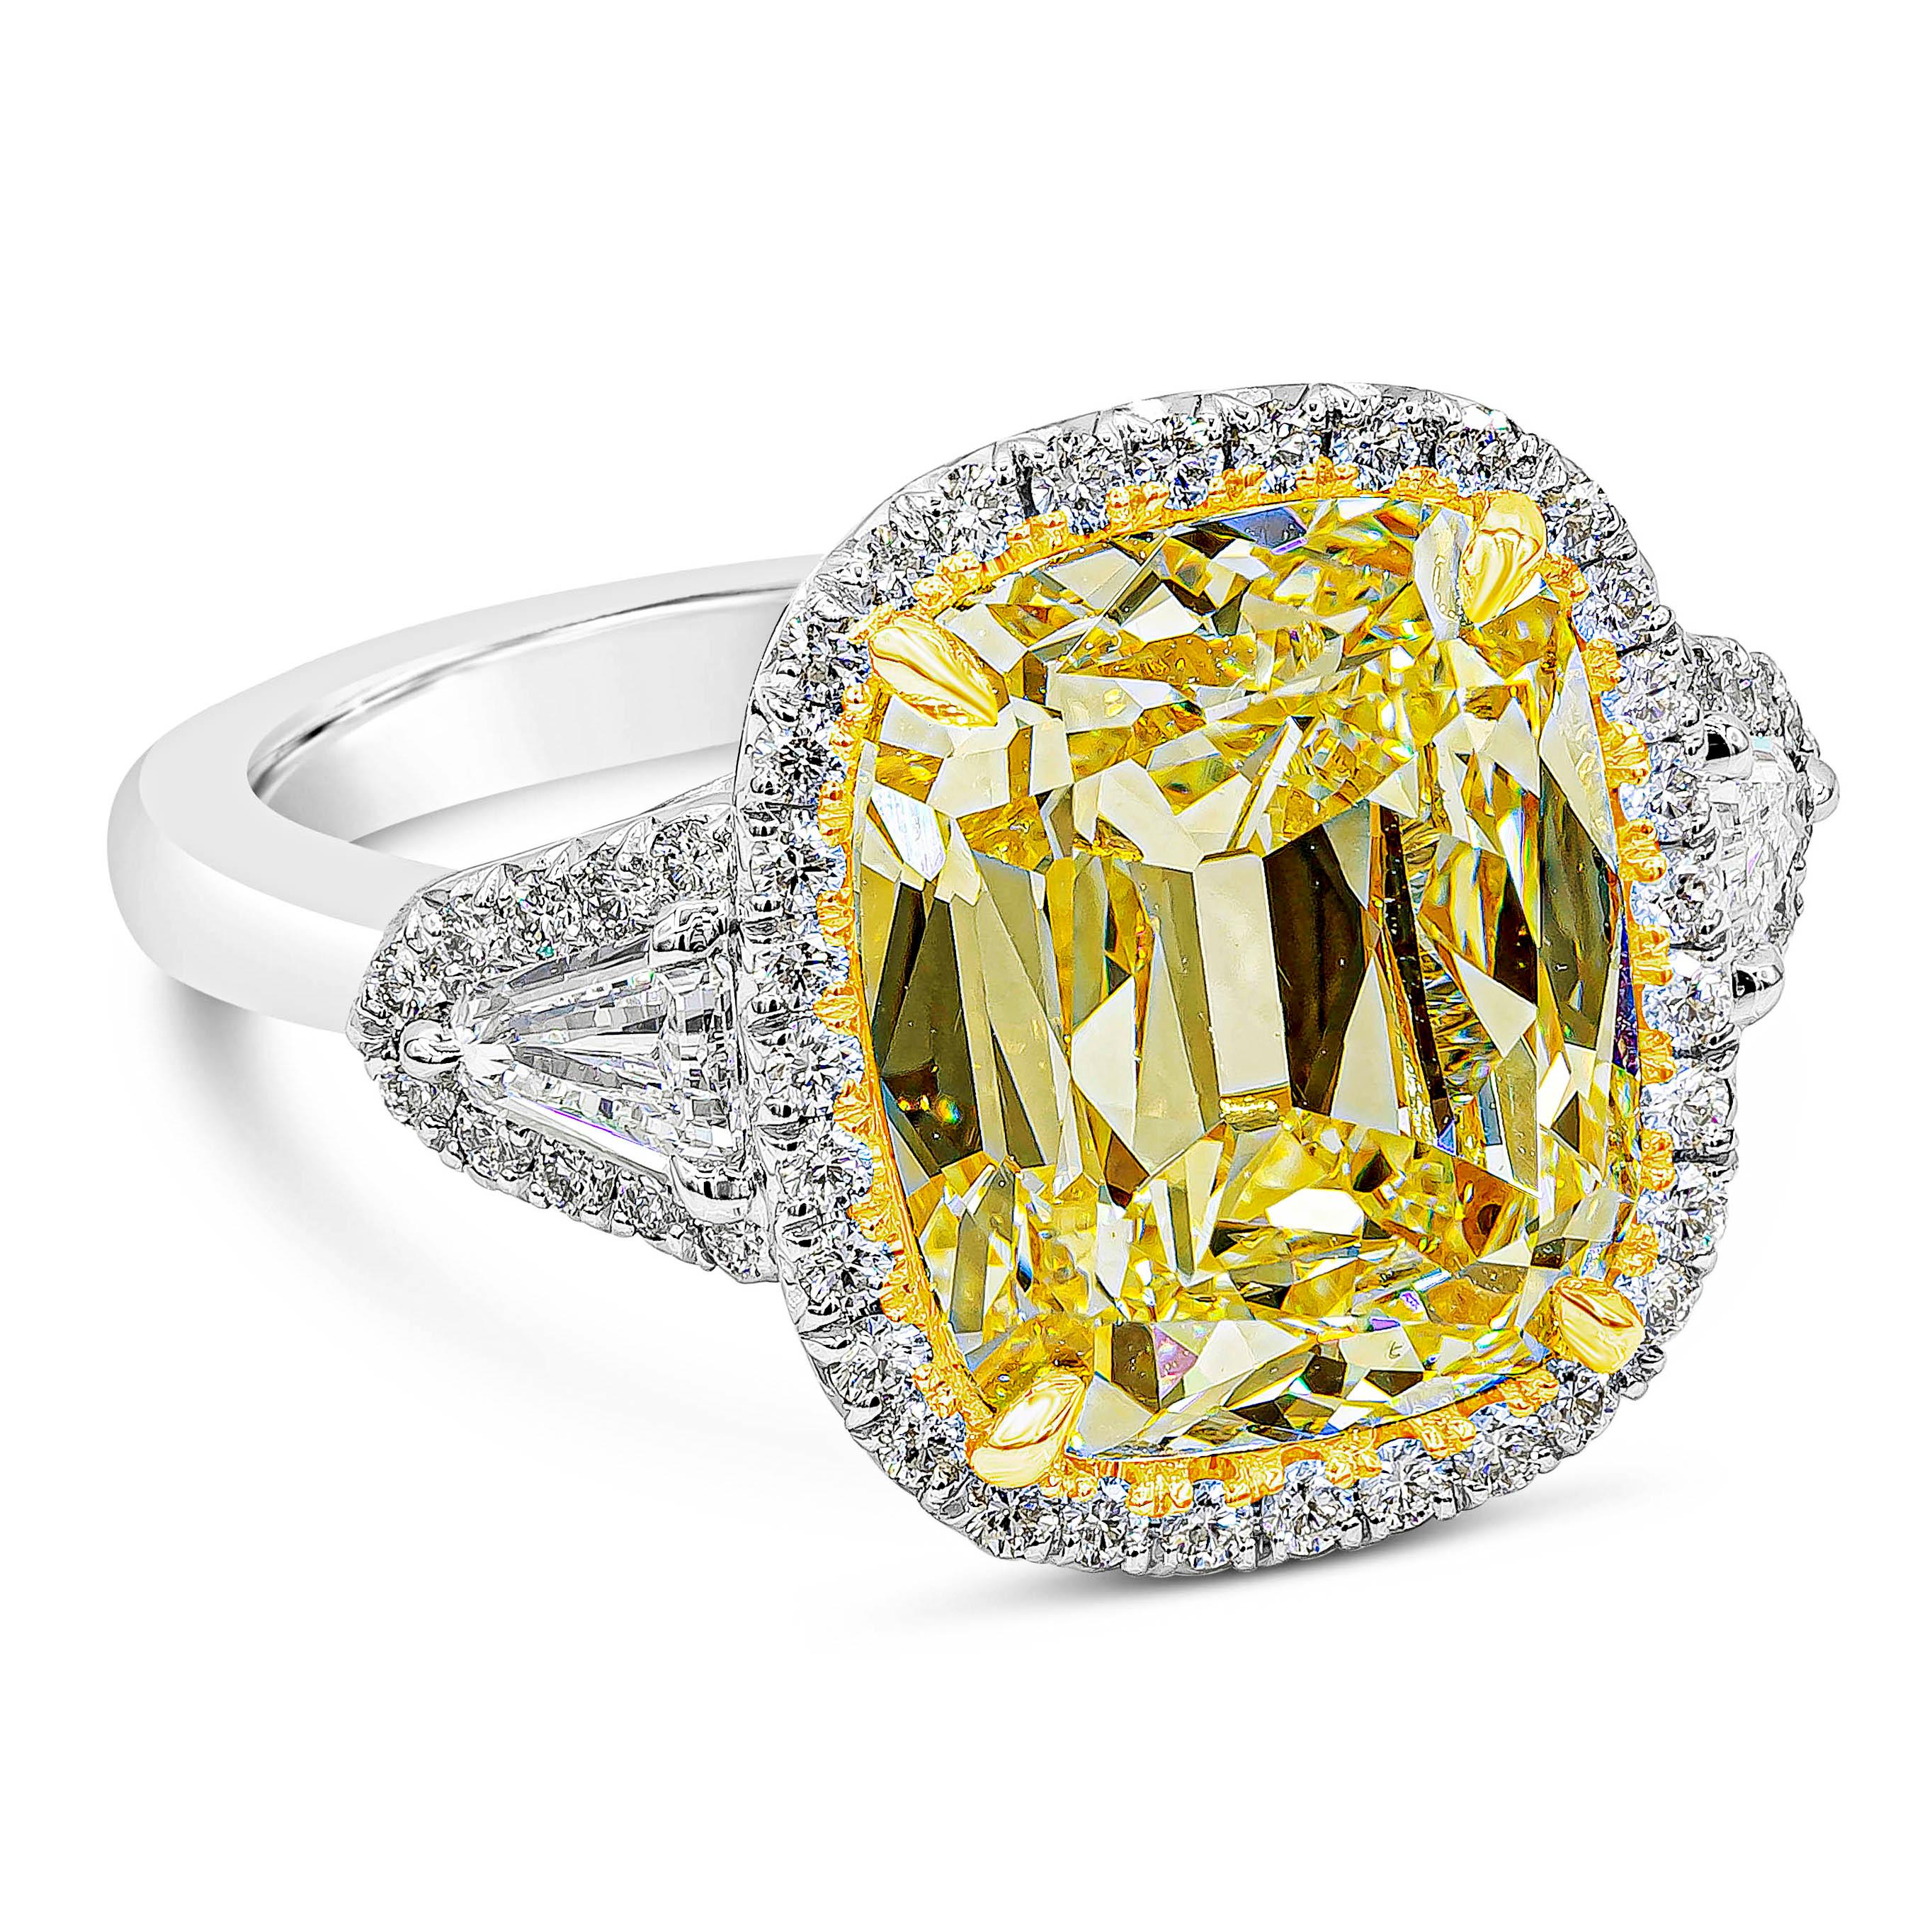 A well-crafted engagement ring showcasing a 6.47 carat light yellow cushion brilliant cut diamond certified by GIA as U-V color and SI1 clarity, set in a four prong basket of 18K yellow gold. Surrounded by brilliant diamonds in a halo setting with a